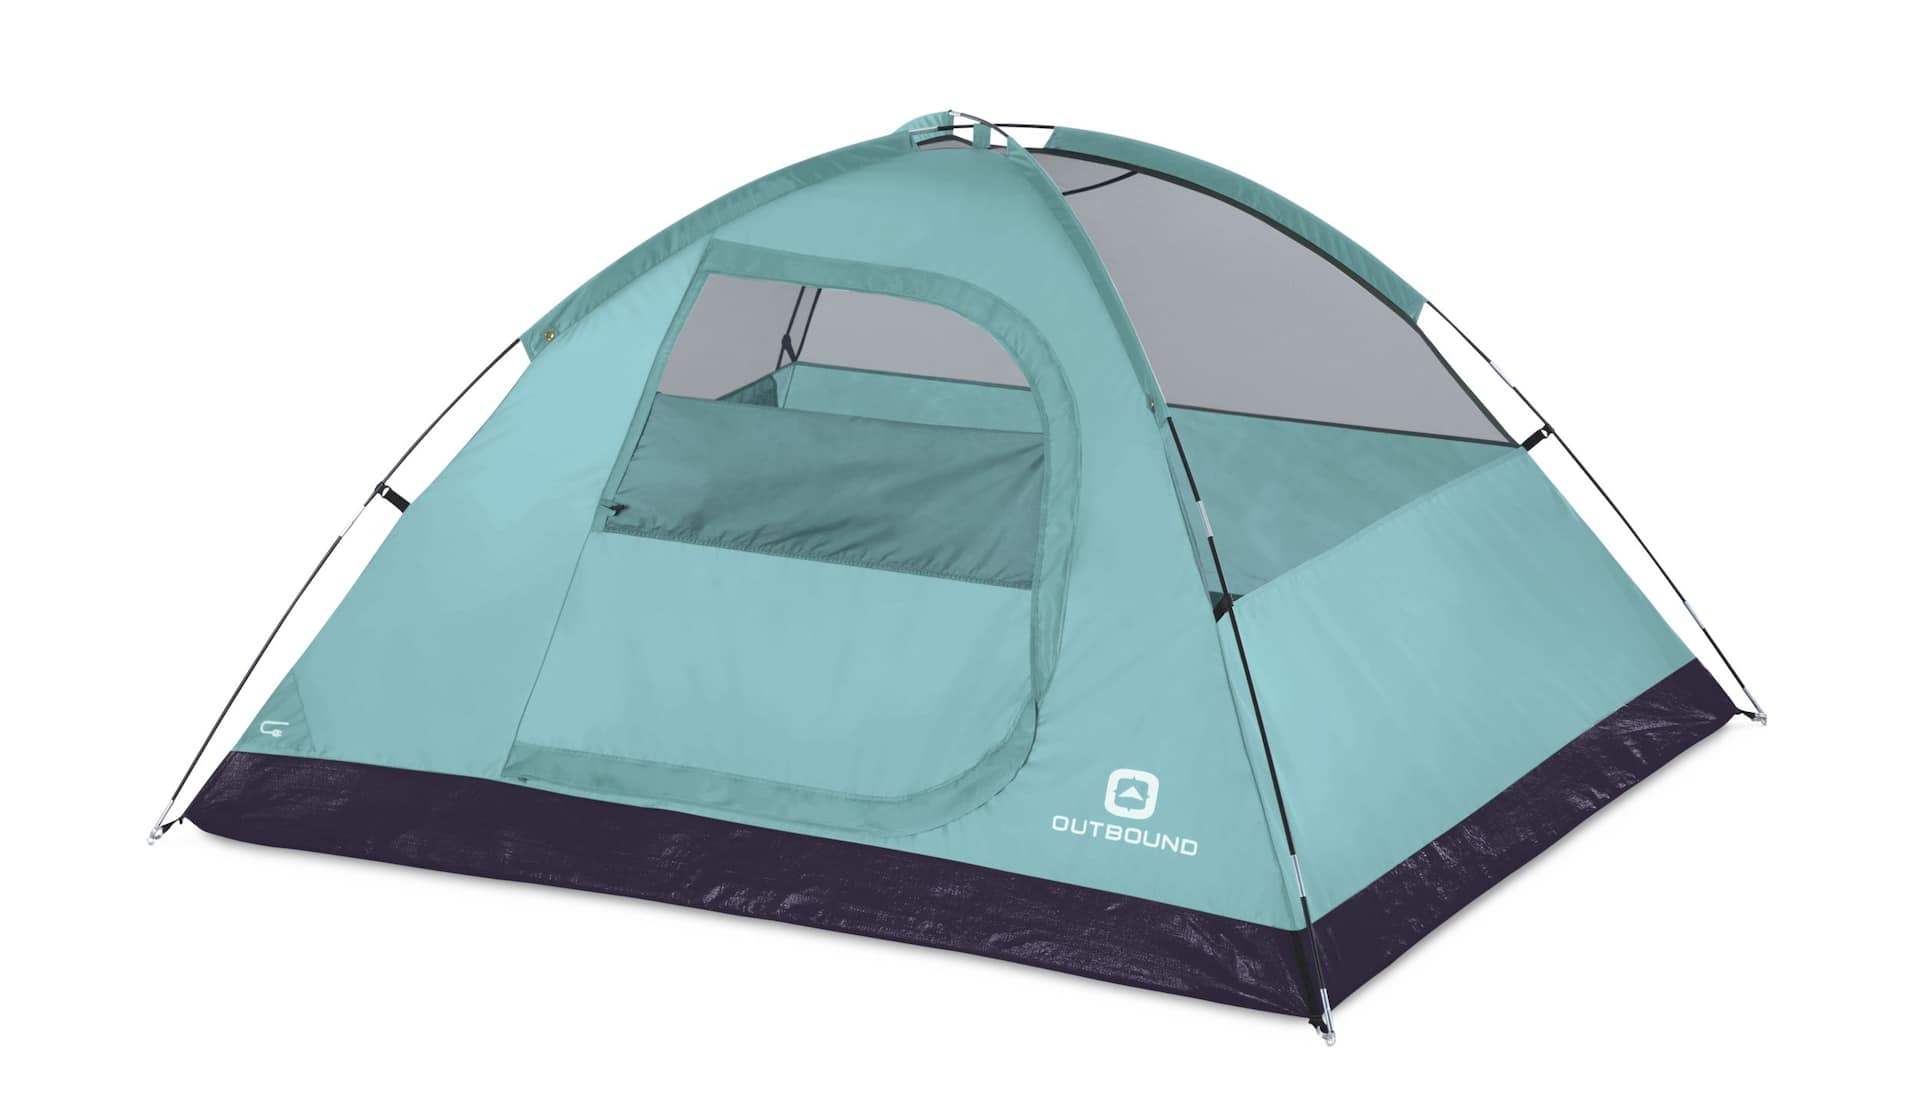 Woods Creekside 3-Season, 3-Person Camping Dome Tent w/ Canopy/Awning, Rain  Fly & Carry Bag